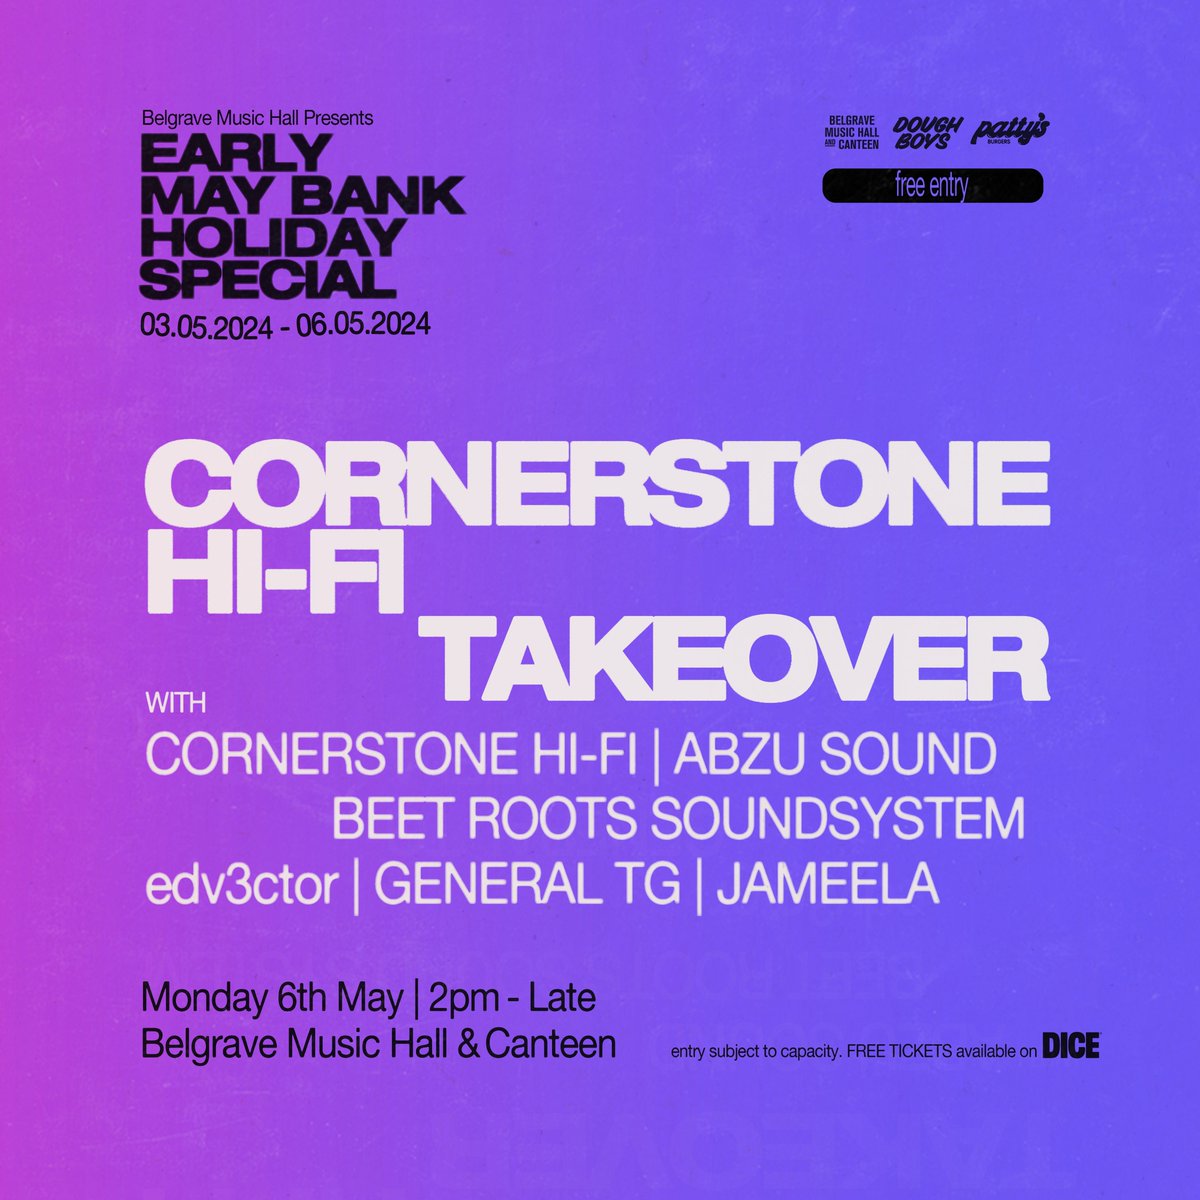 dice.fm/event/pxg7k-co… Rounding off our weekend we have none other than Leeds legends Cornerstone Hi-Fi welcoming down a load of friends and selectors to play roots, dub, reggae and everything in between👌 FREE ENTRY